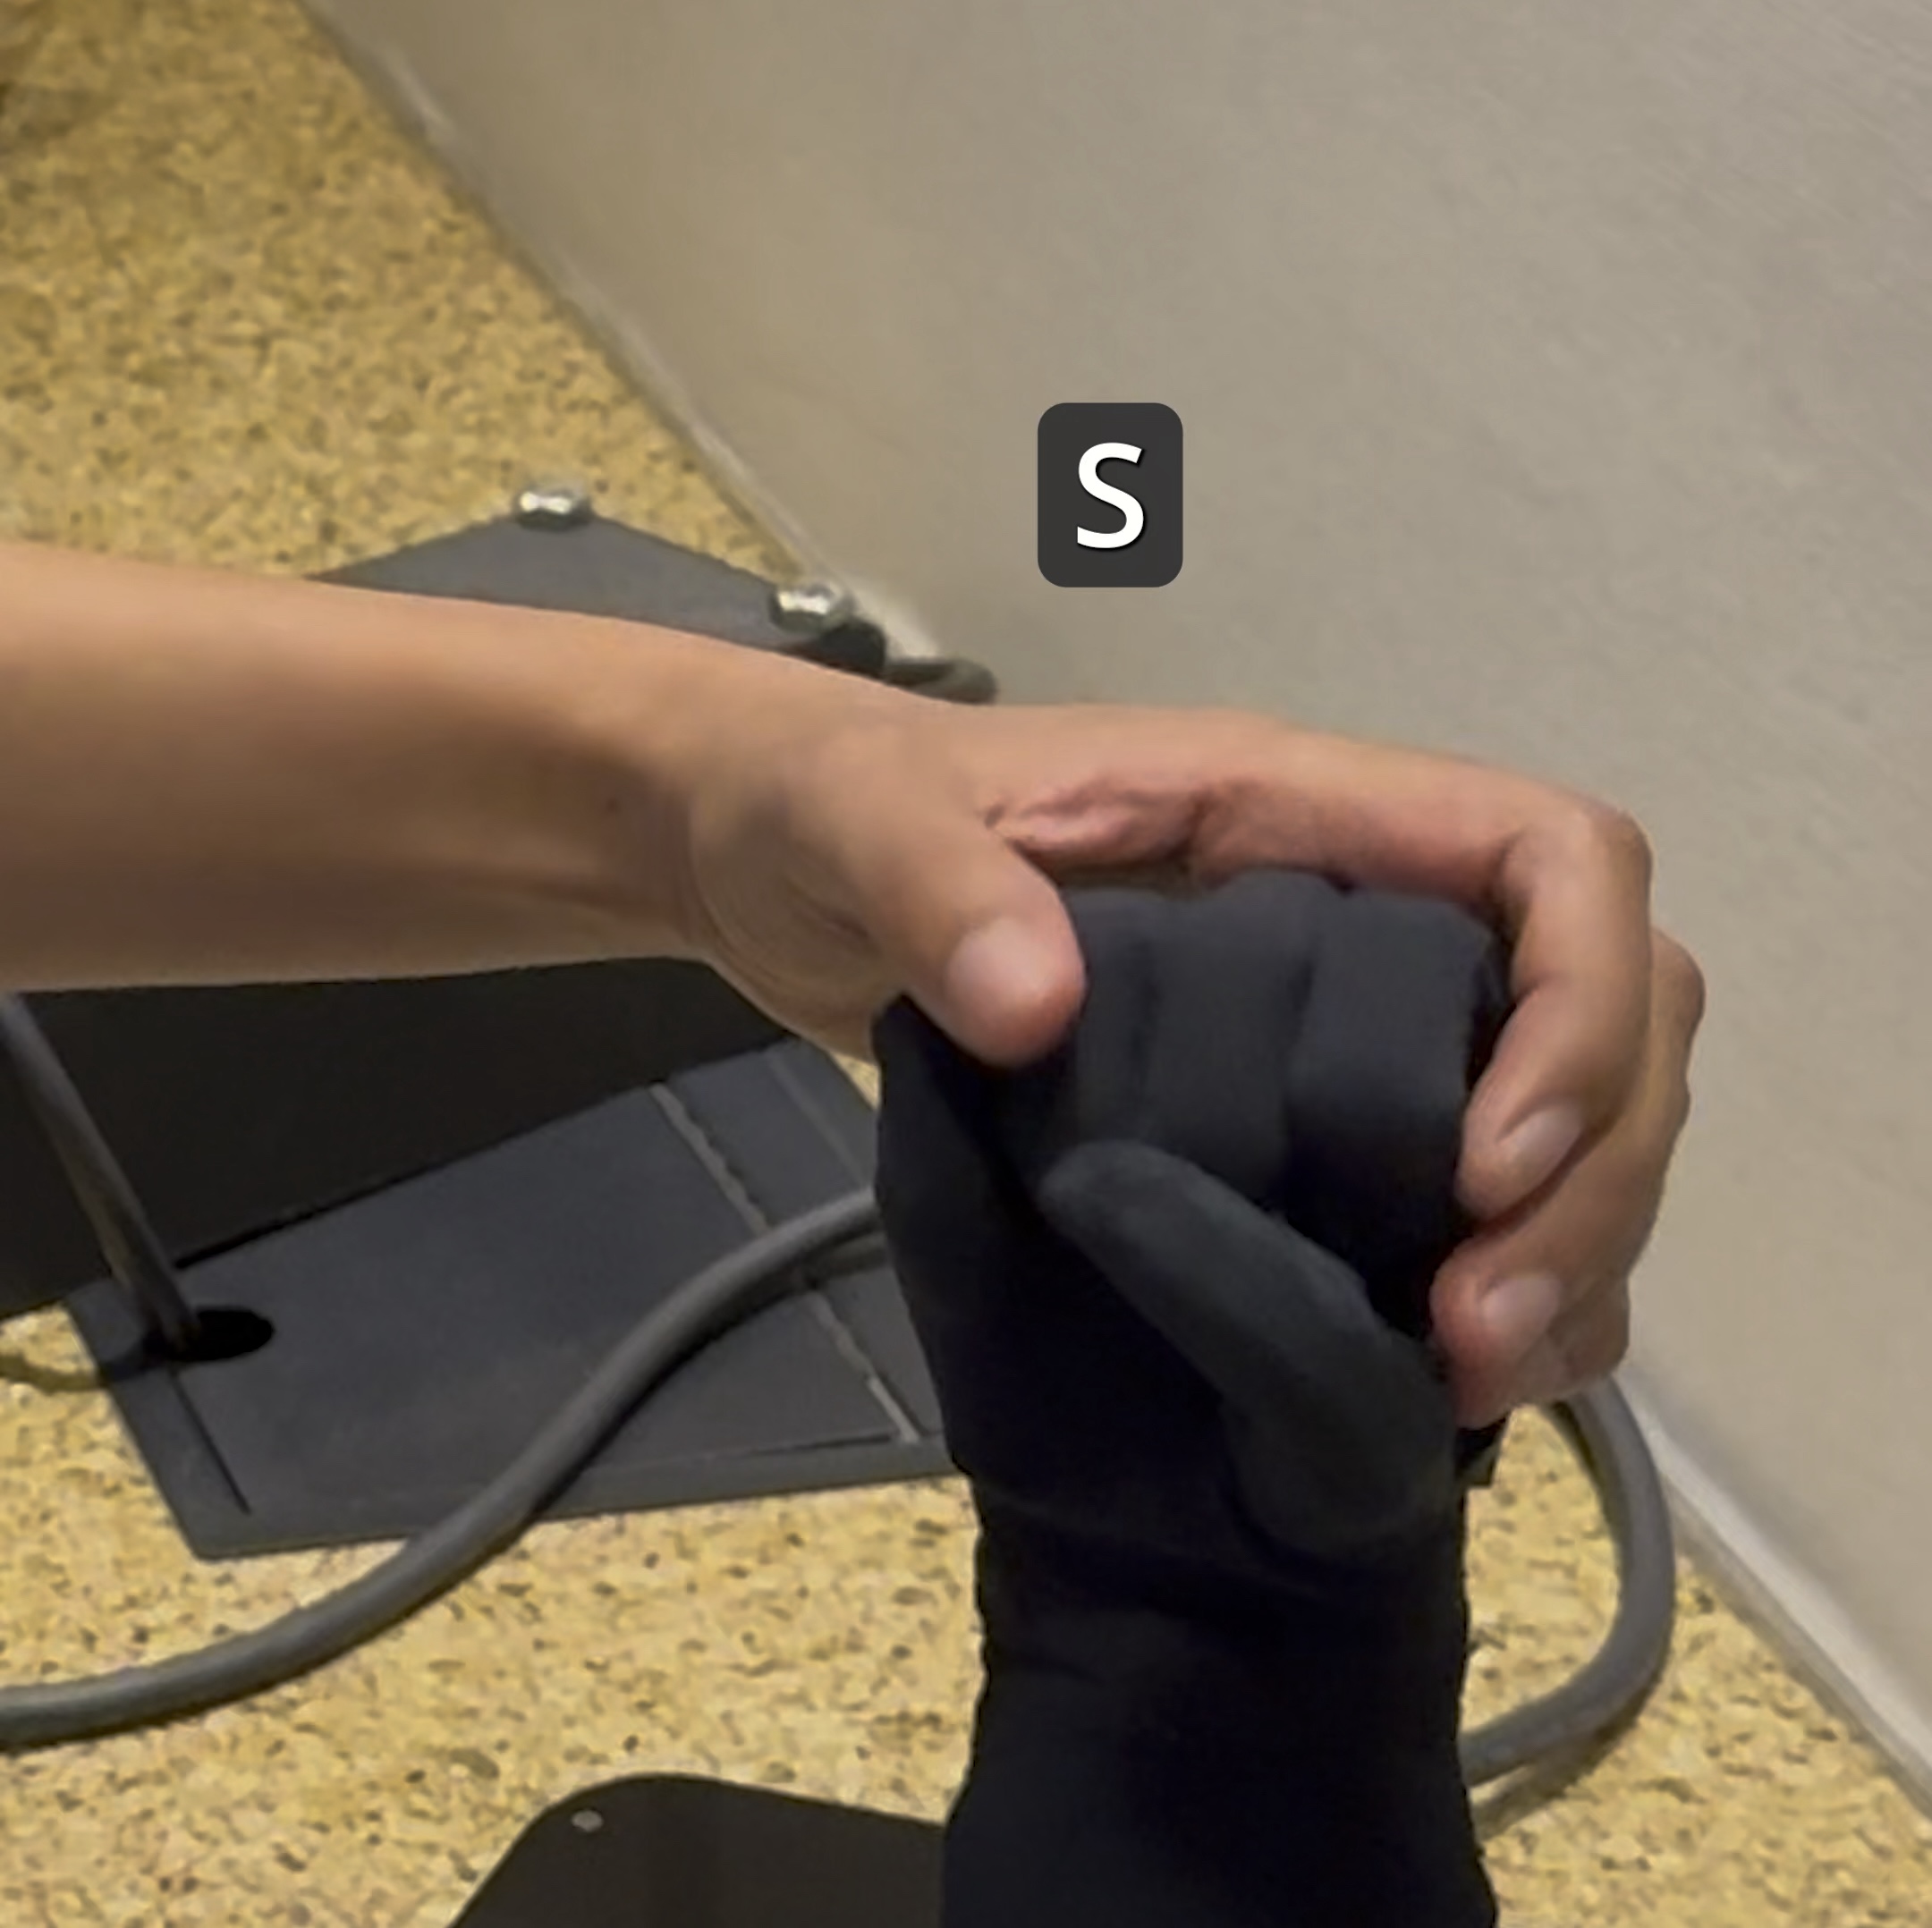 Haben feeling a black robotic hand that is signing the letter "S"